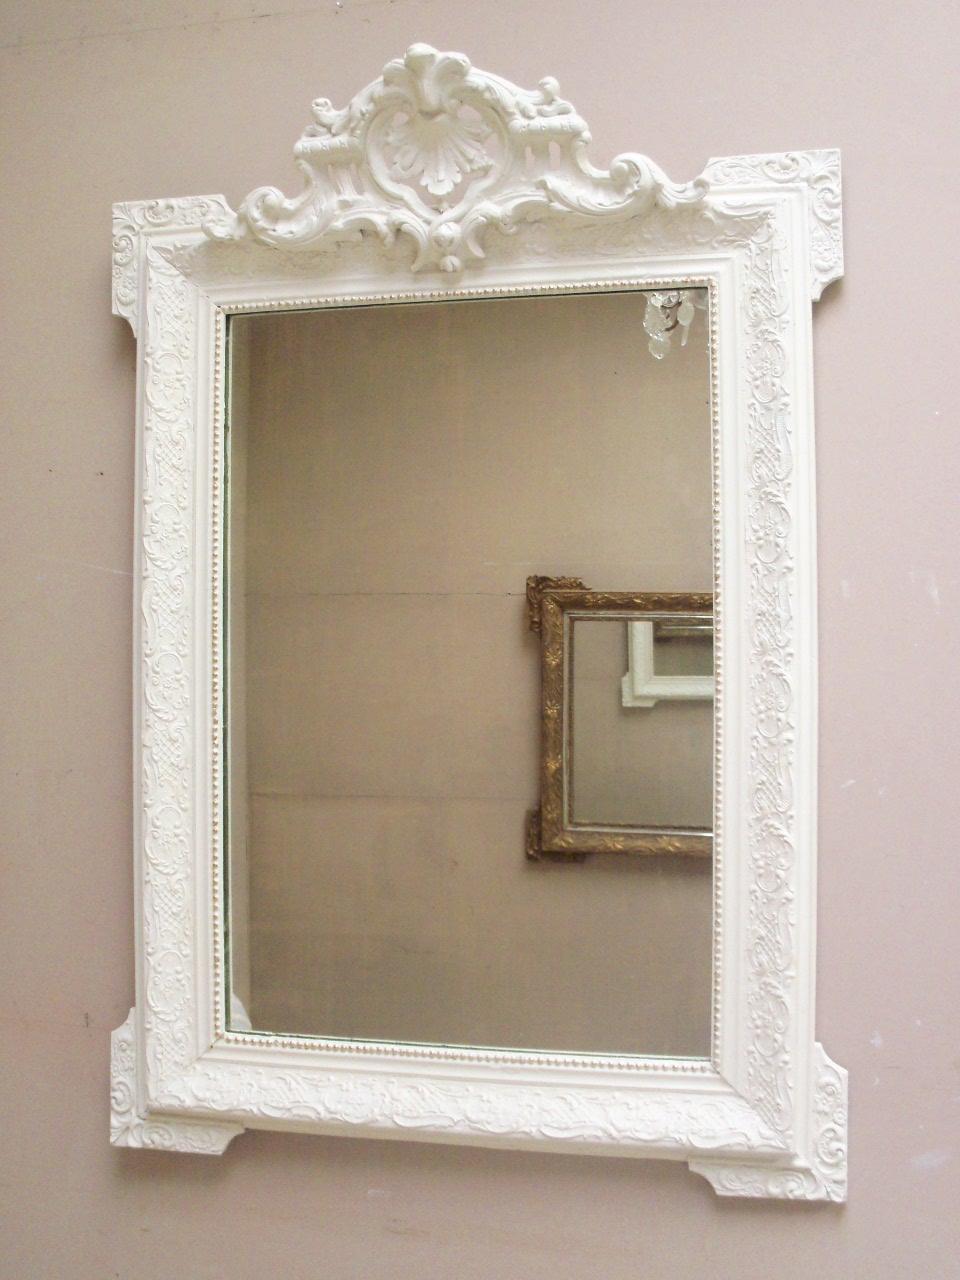 Image of a mirror reflecting another mirror.